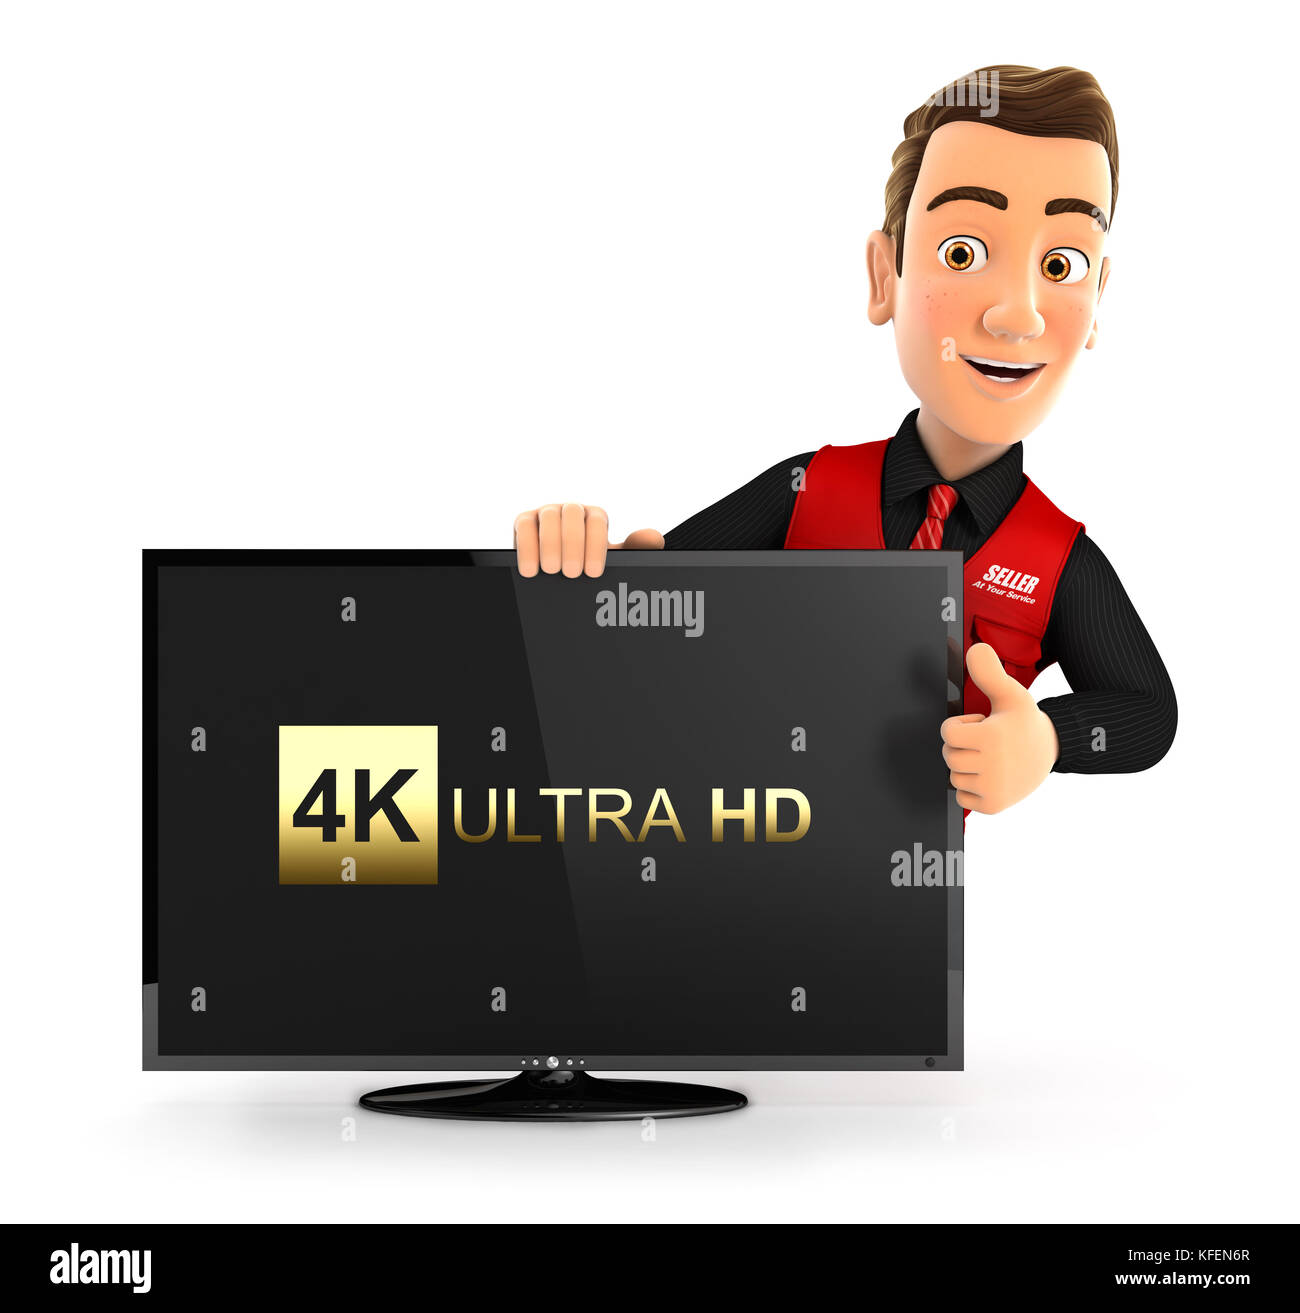 3d seller with 4K ultra HD television and thumb up, illustration with isolated white background Stock Photo